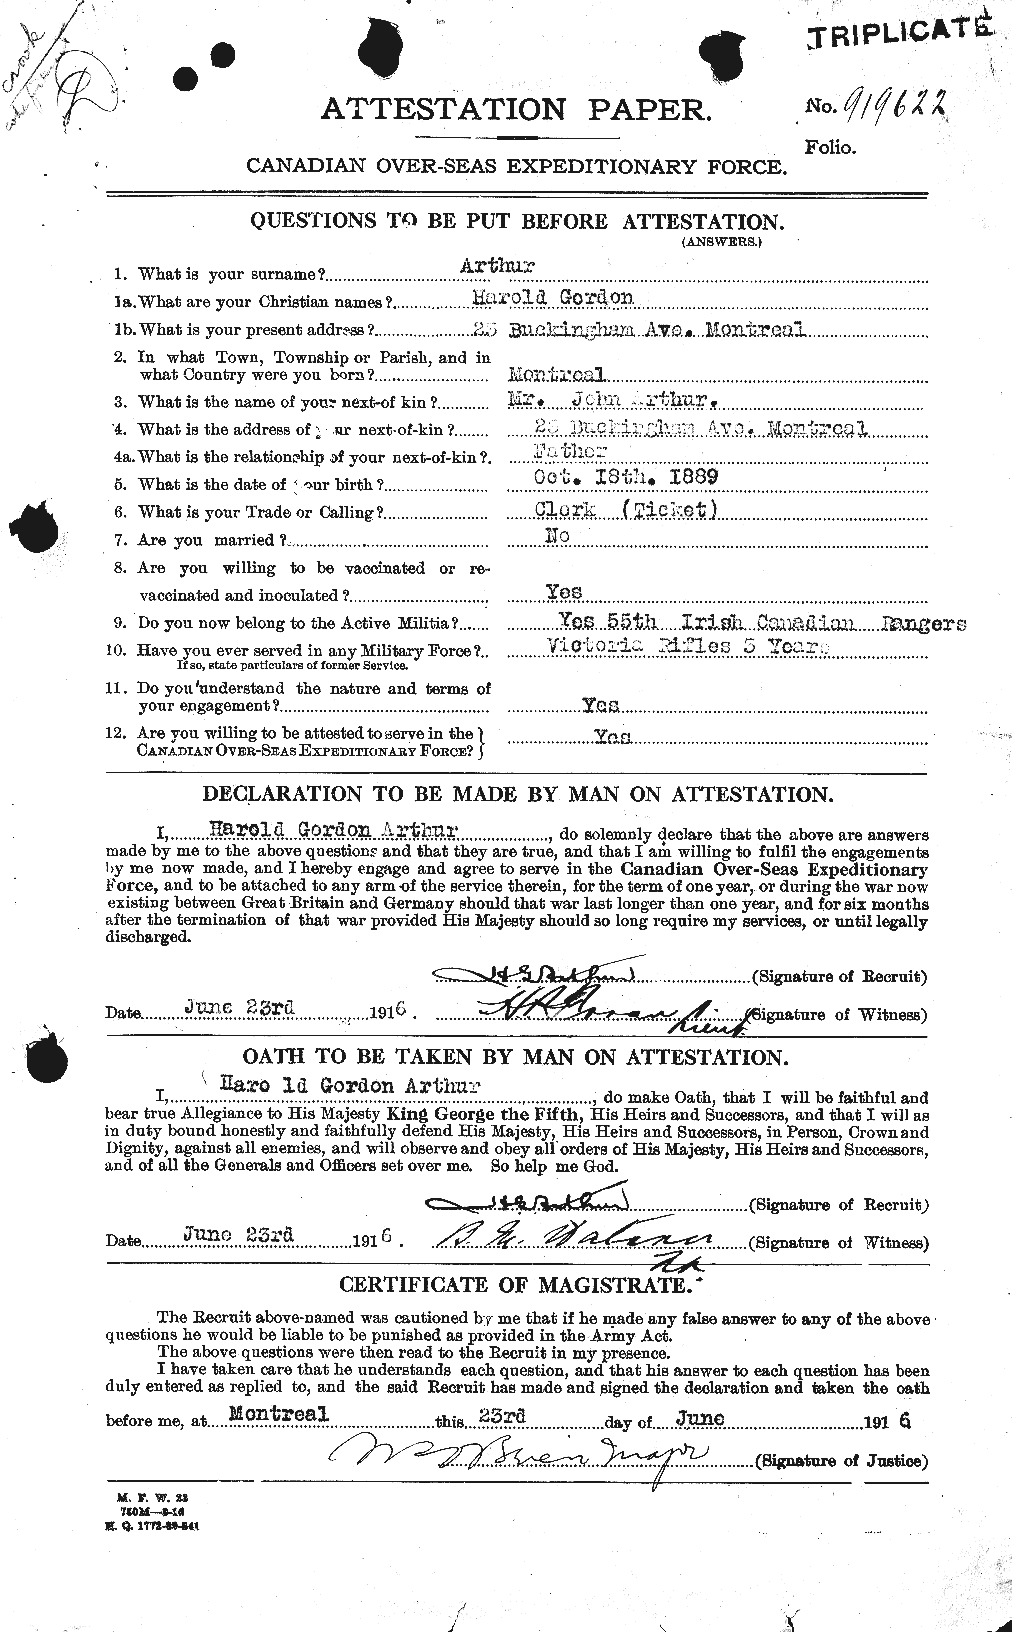 Personnel Records of the First World War - CEF 690900a